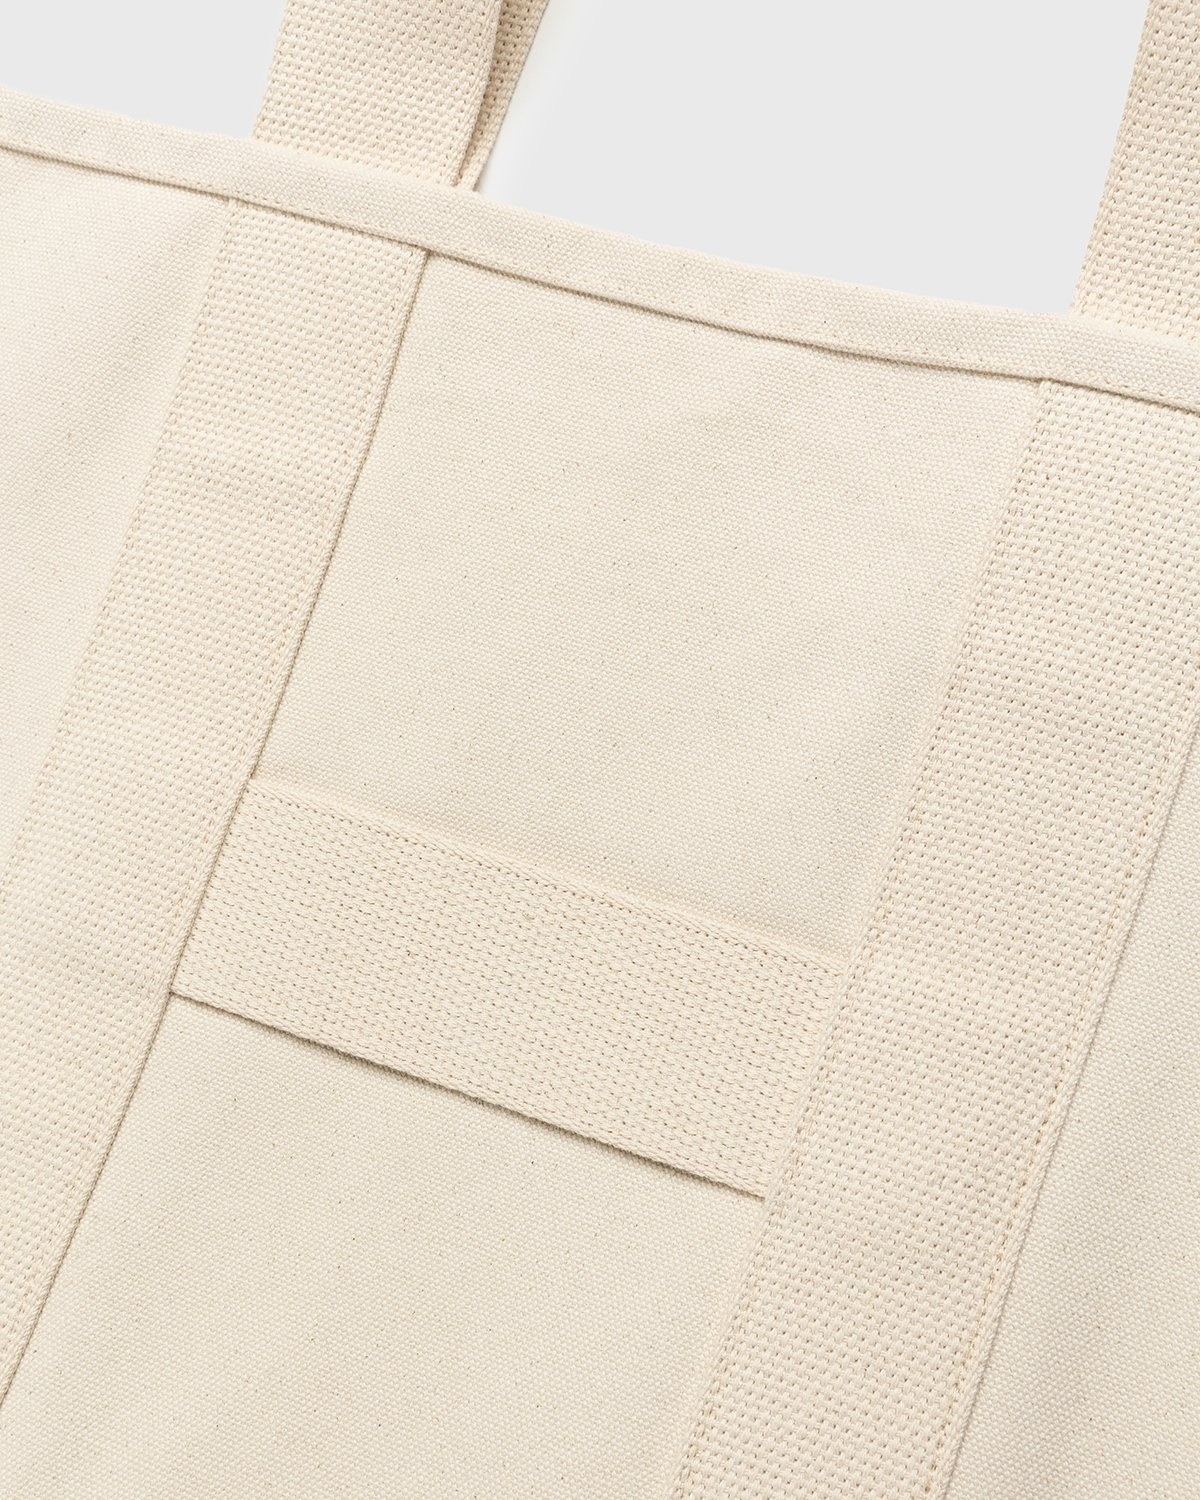 Highsnobiety – XL Canvas "H" Tote Natural - Tote Bags - Beige - Image 4